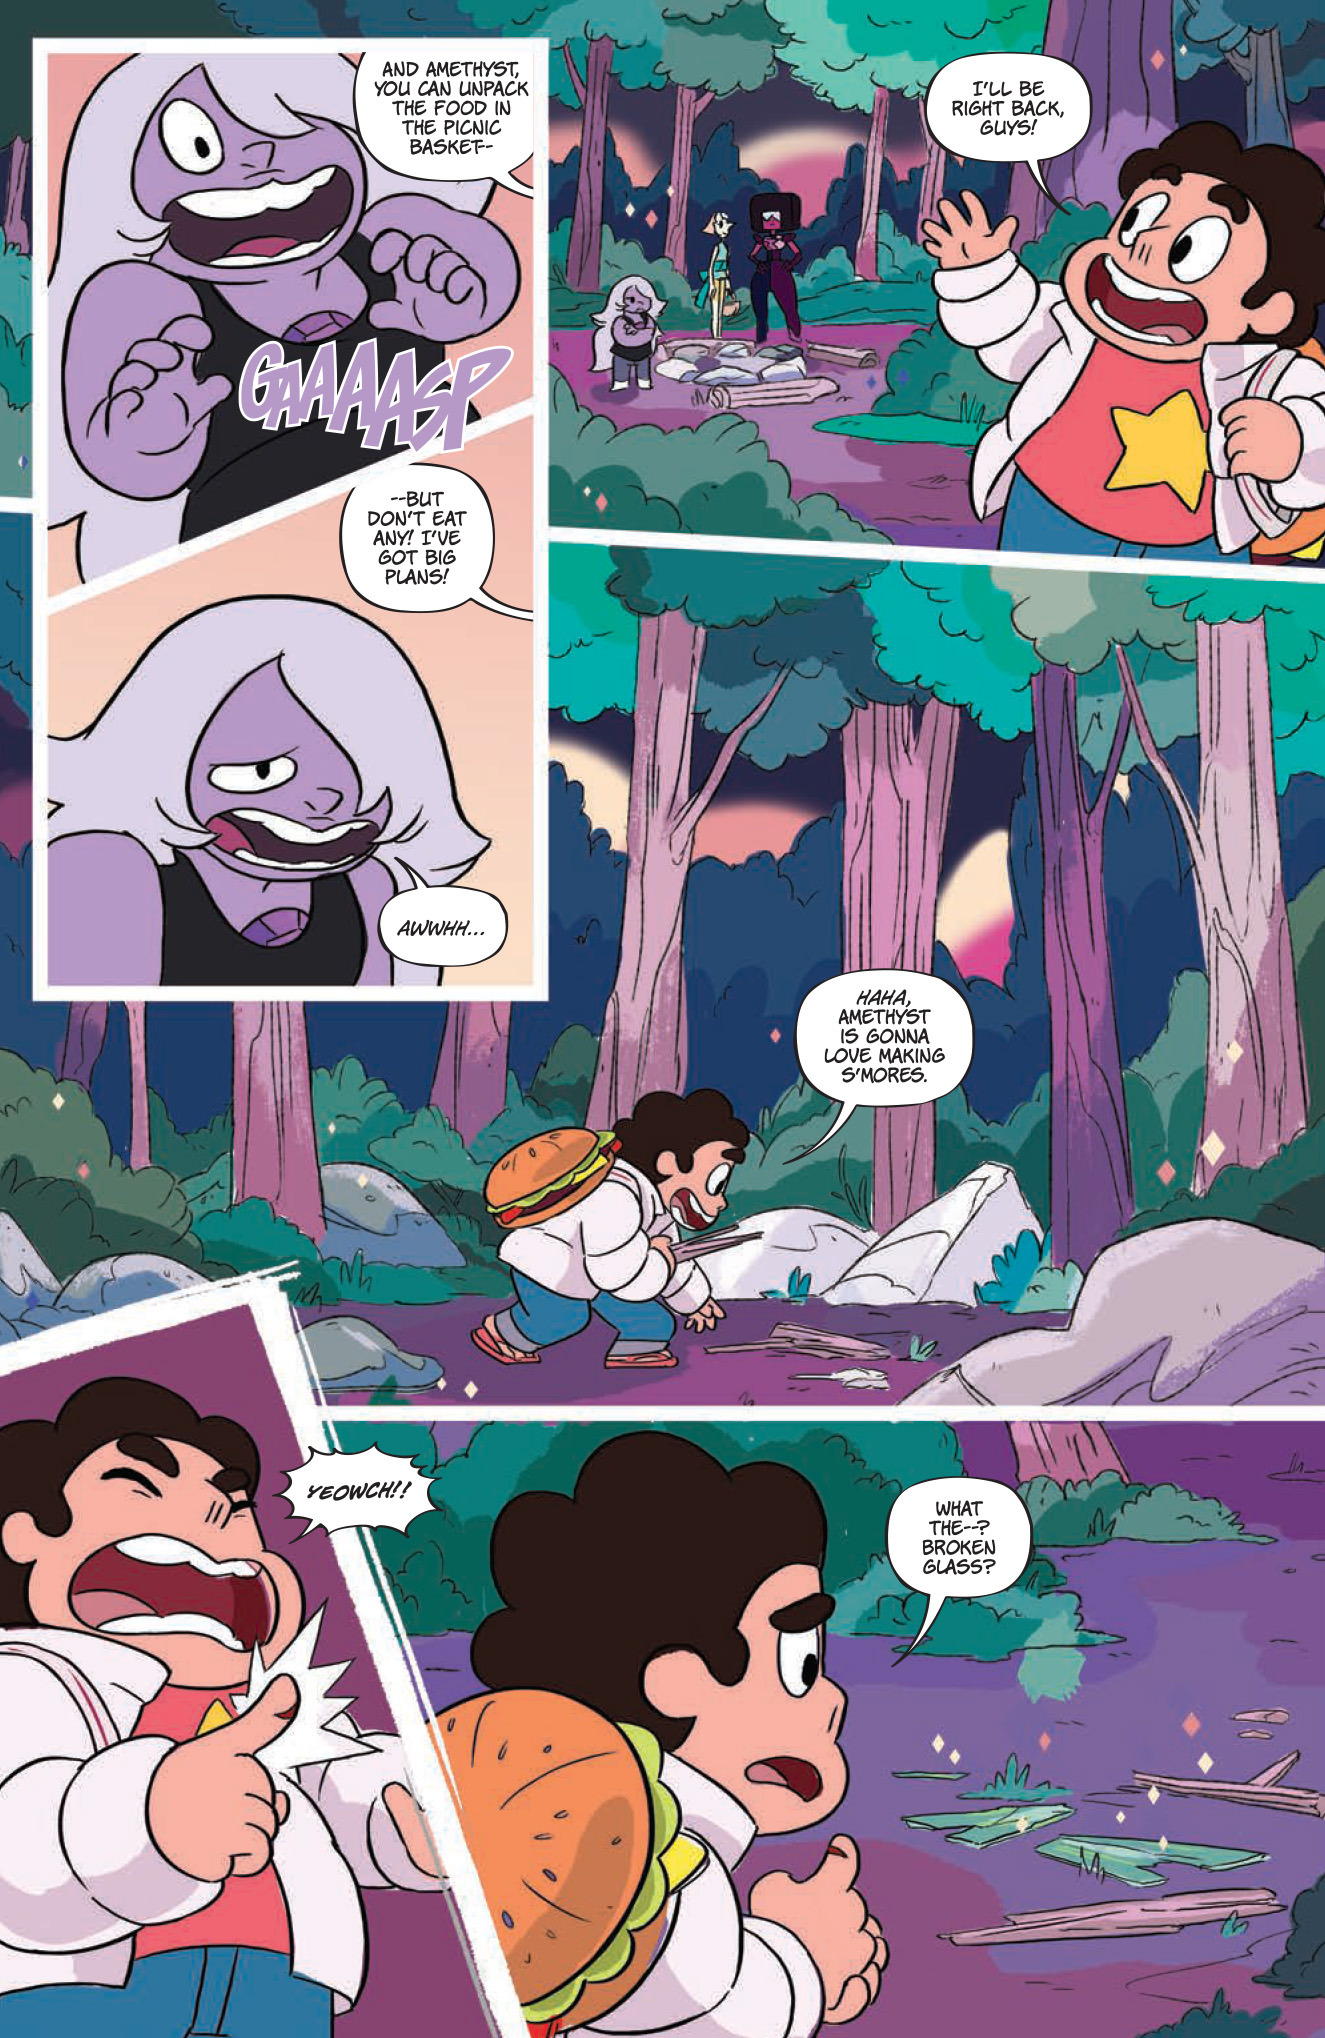 Steven Universe and The Crystal Gems #1 | Fresh Comics